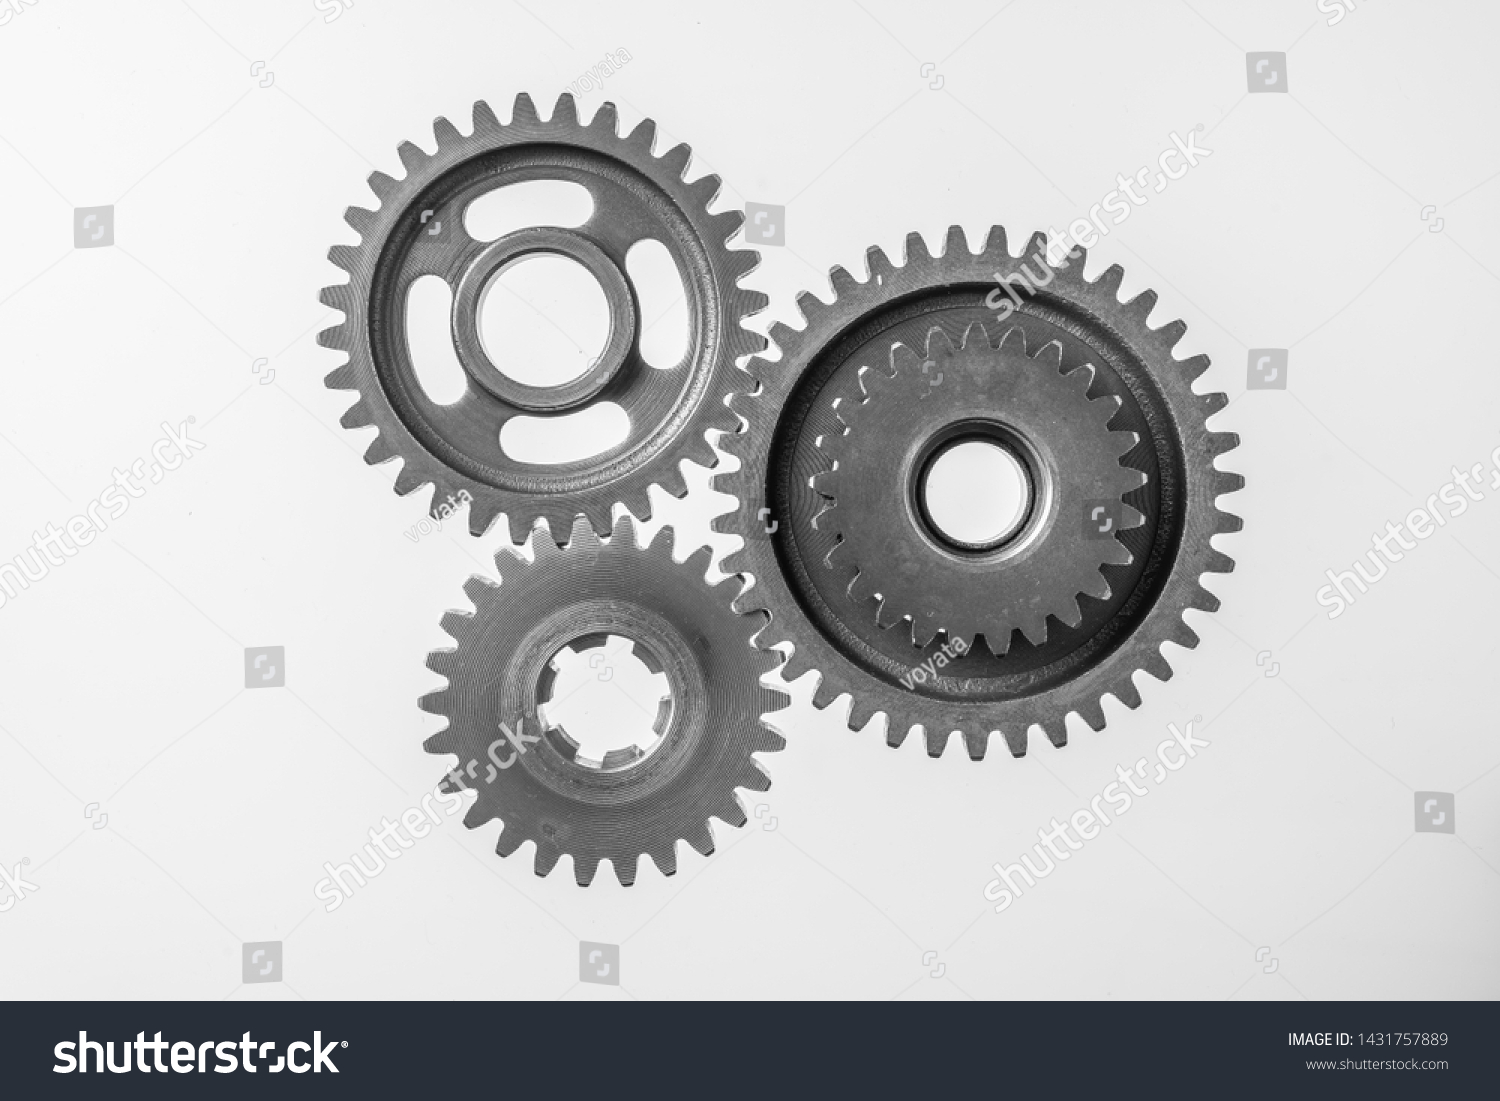 Teamwork business concept - top view of 3 metal gear isolated on white background for mockup. real photo, not 3D render #1431757889